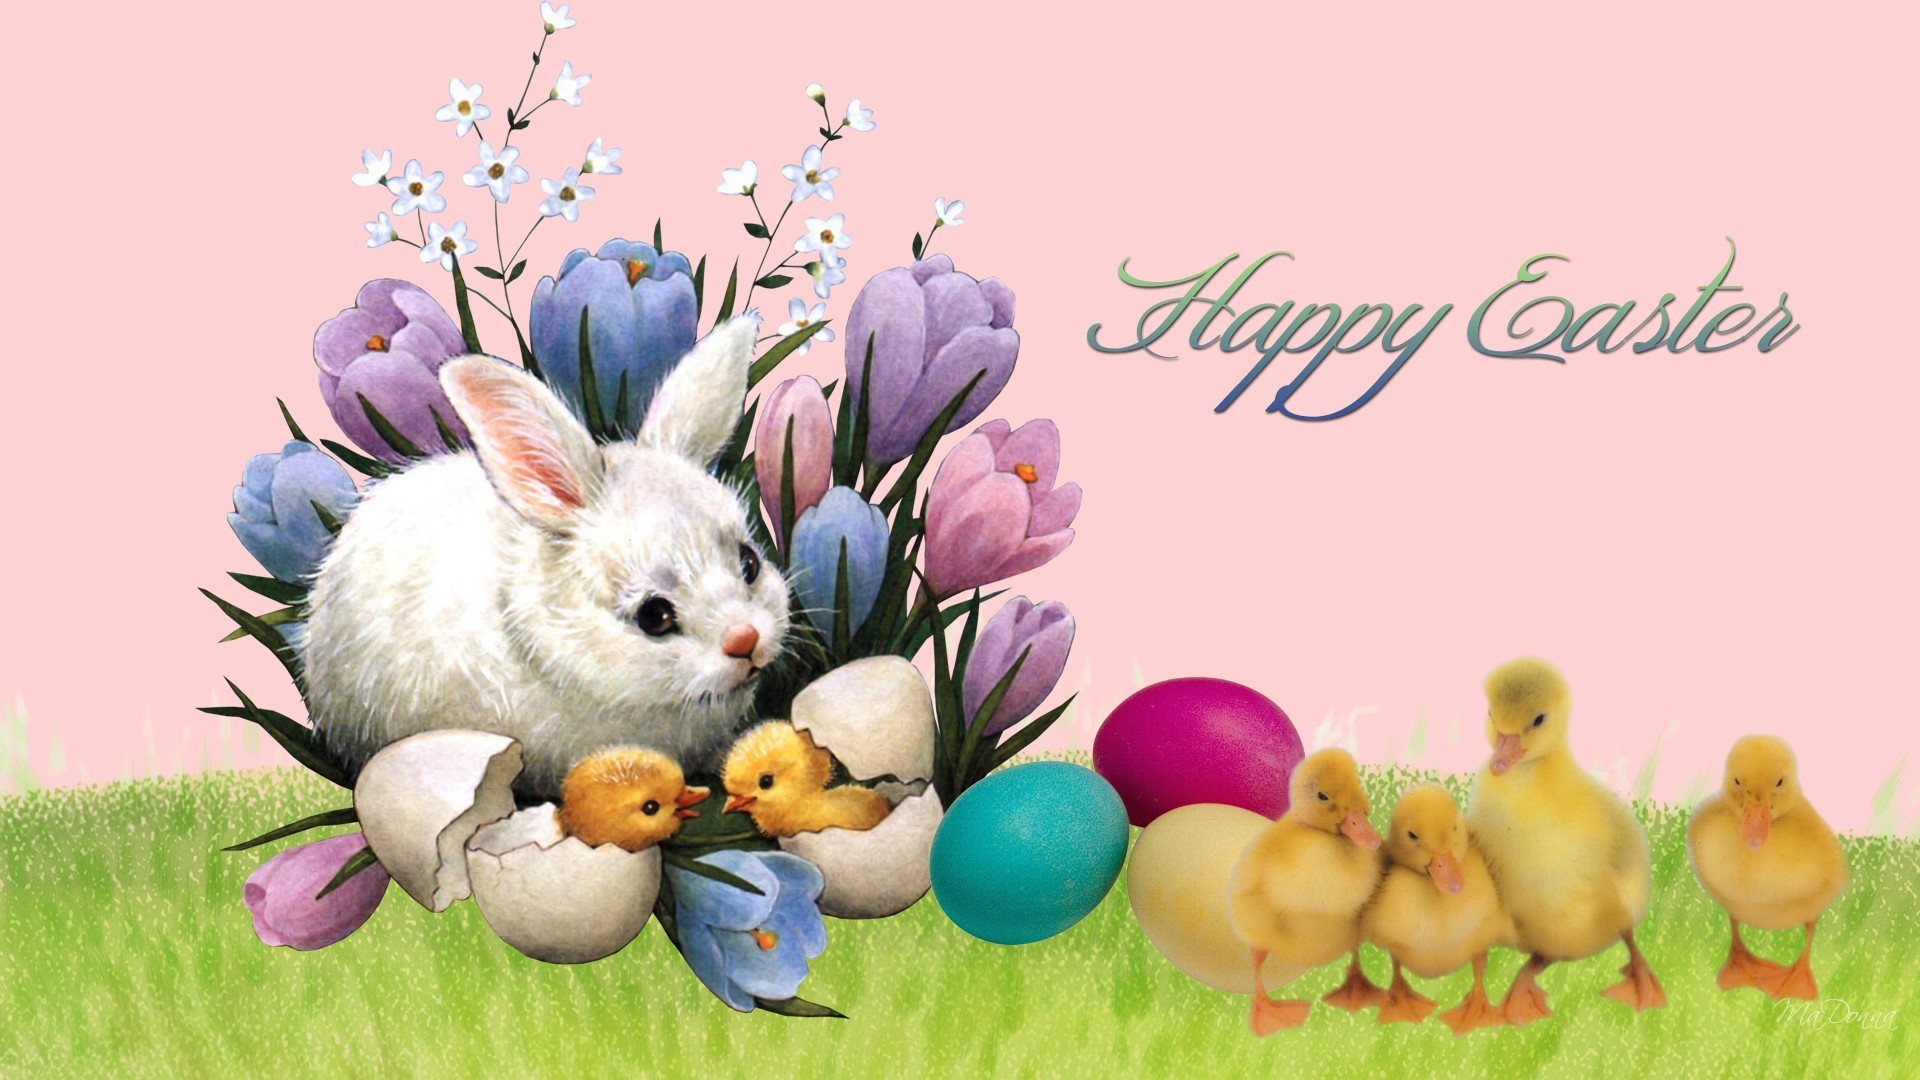 Free wallpaper easter bunny rabbits Easter Bunny Friends